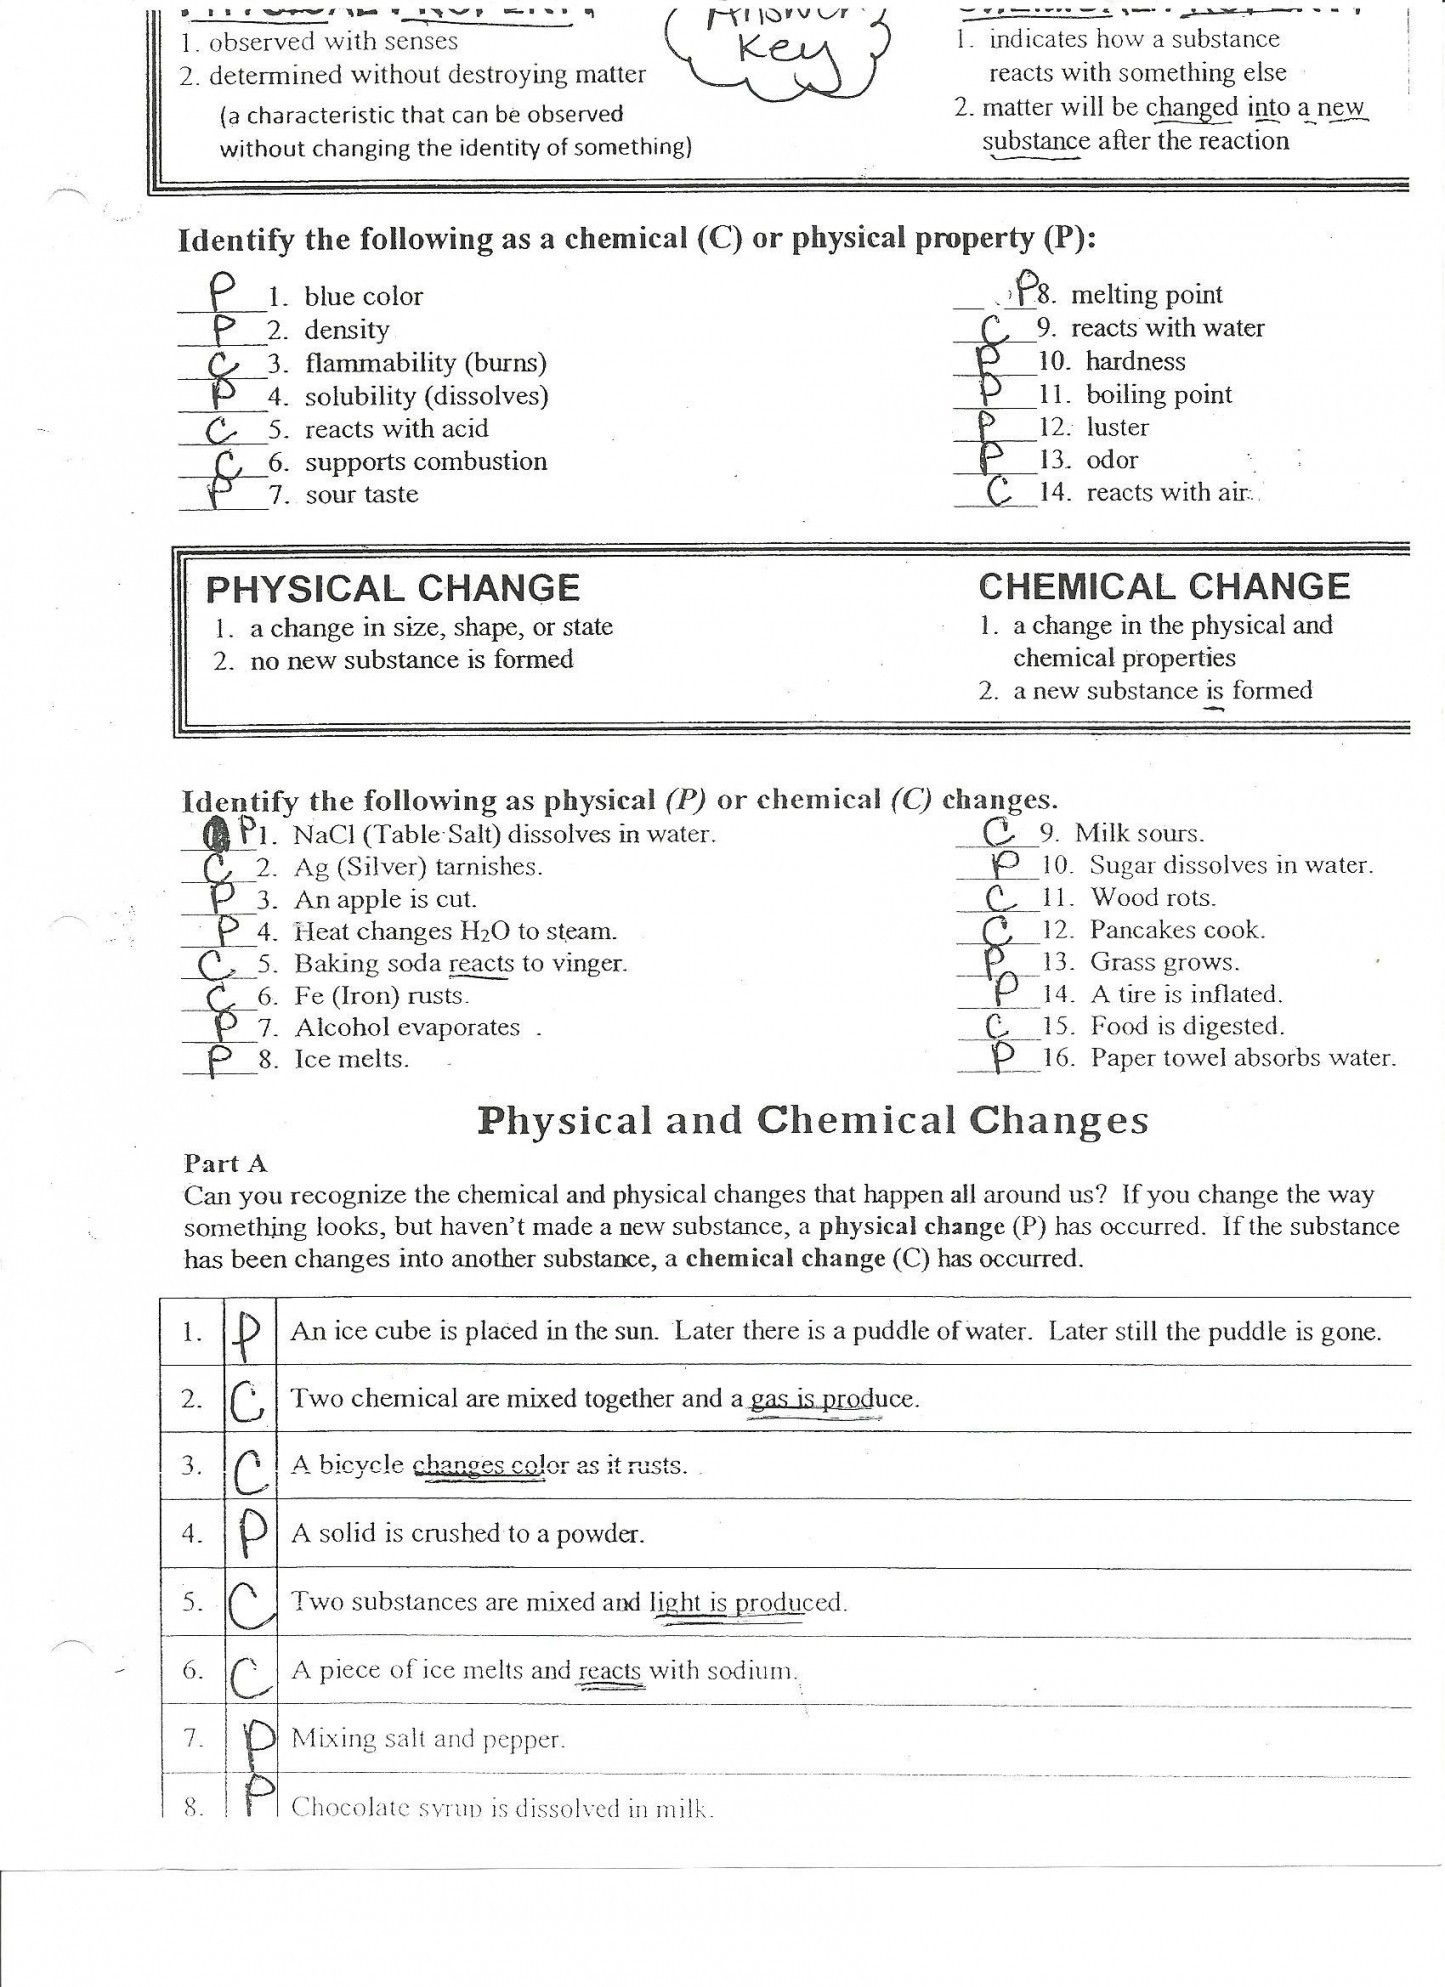 physical and chemical properties and changes review